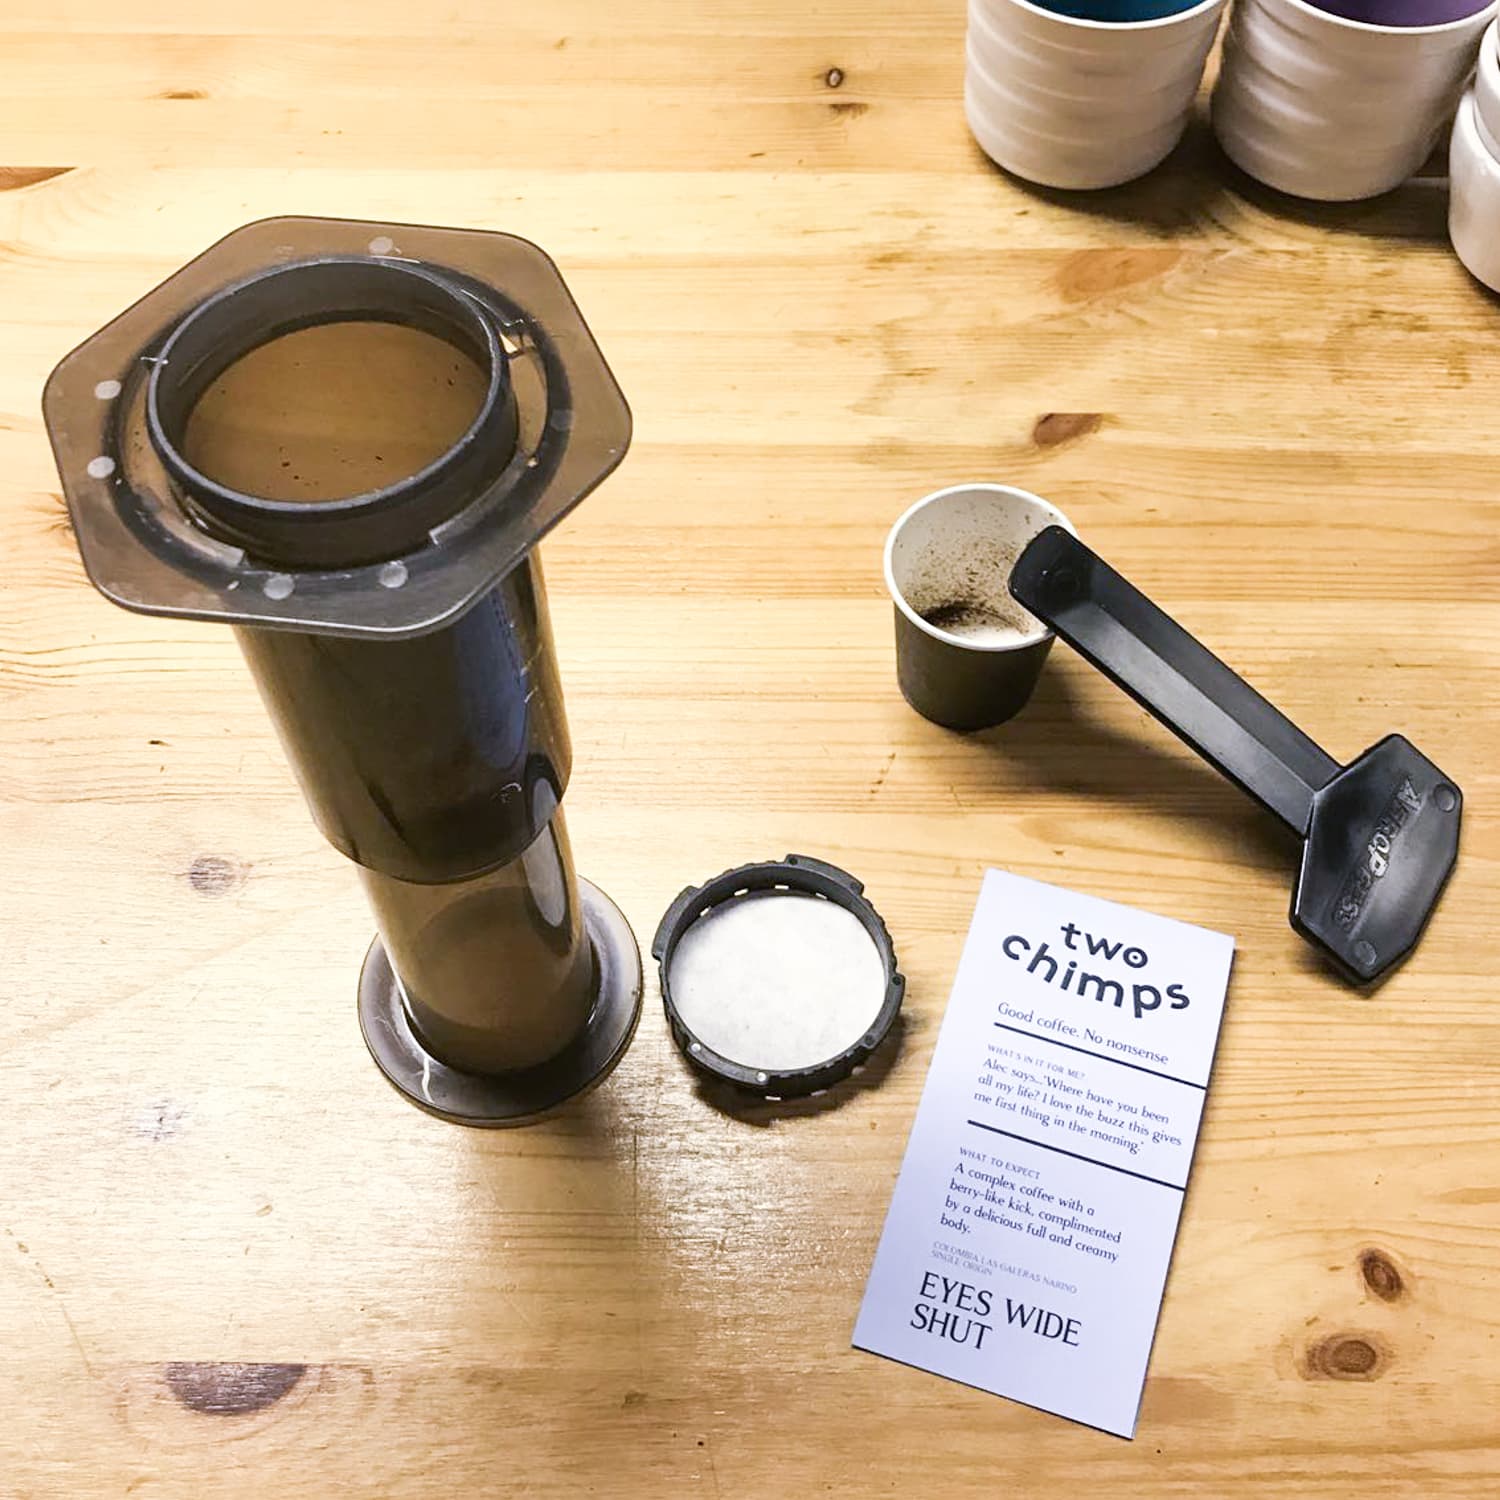 aeropress, stirrer and two chimps coffee label